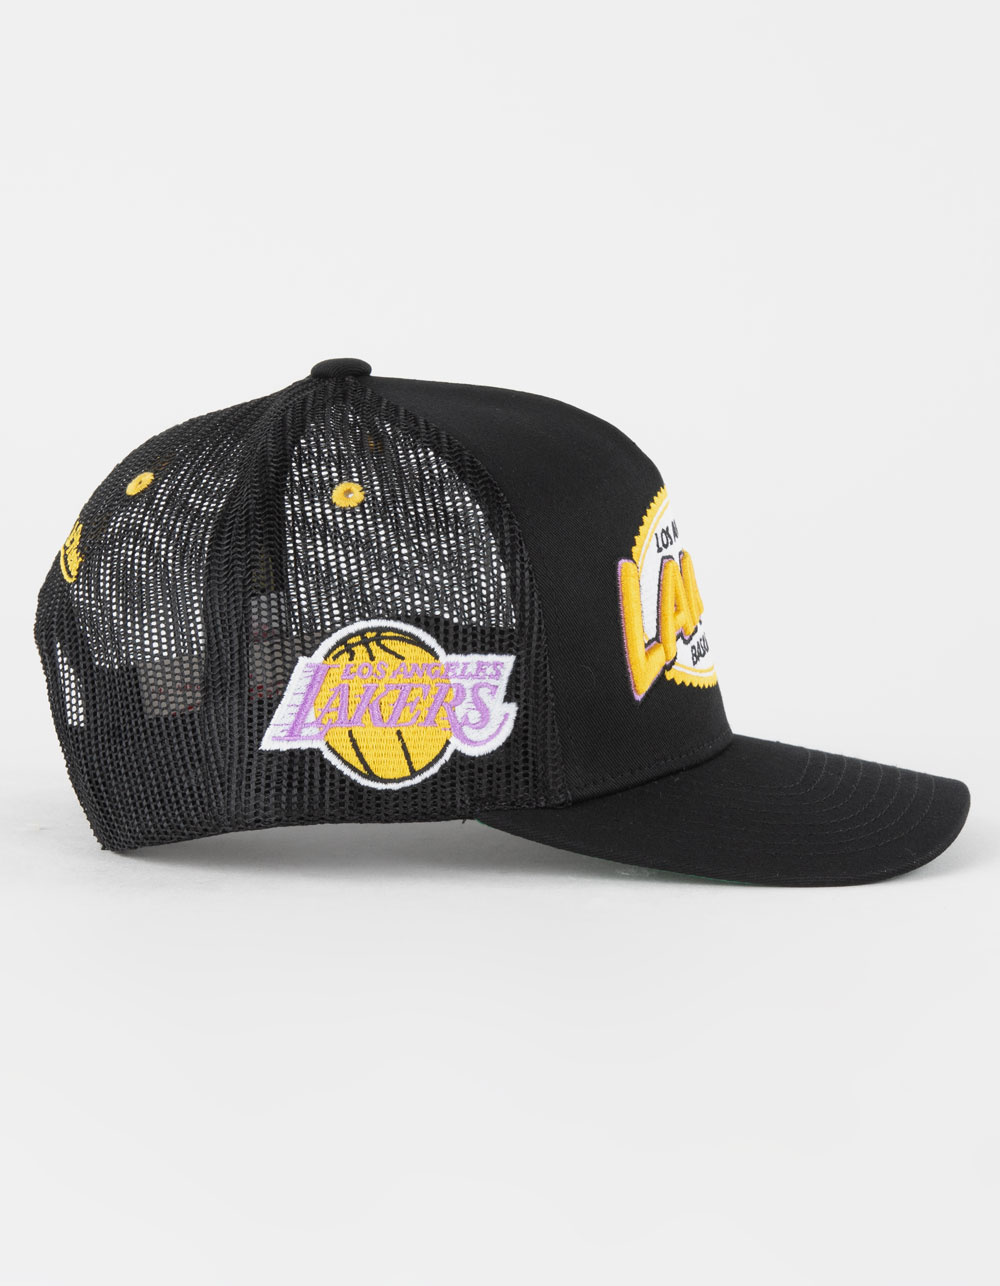 Los Angeles Lakers Basketball Cap Yellow Black Mitchell&Ness Mens One Size  